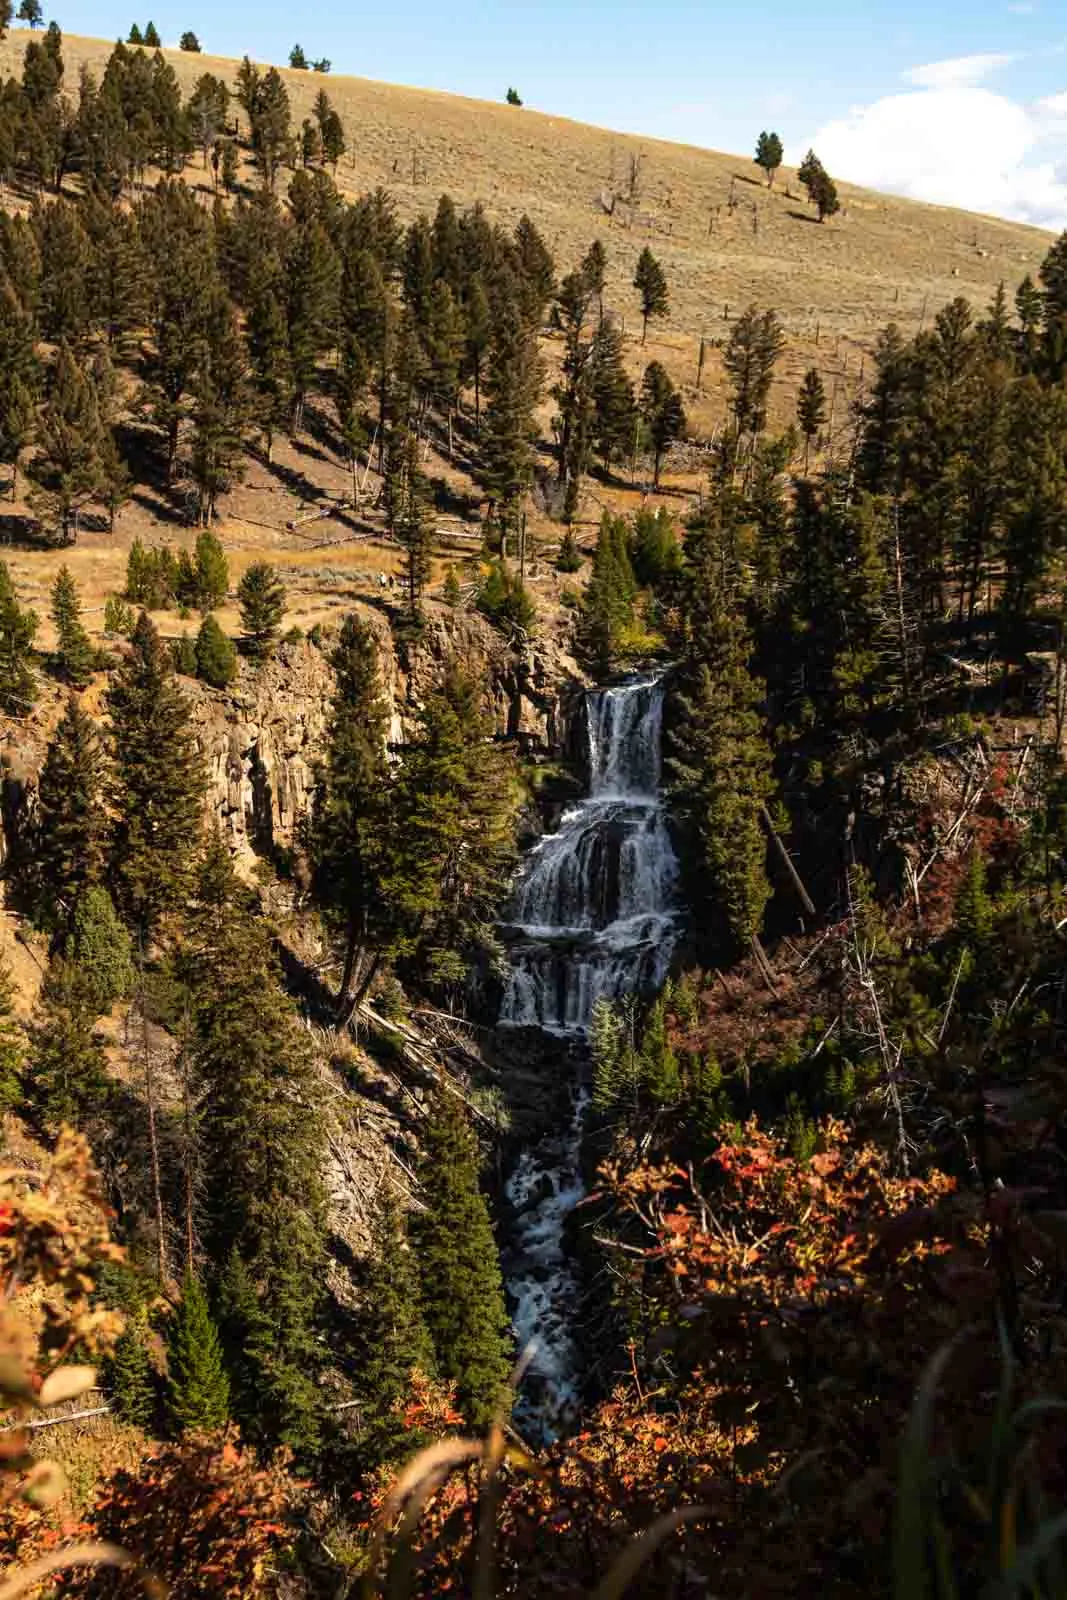 A view of Undine Falls that shouldn’t be skipped on your Yellowstone itinerary